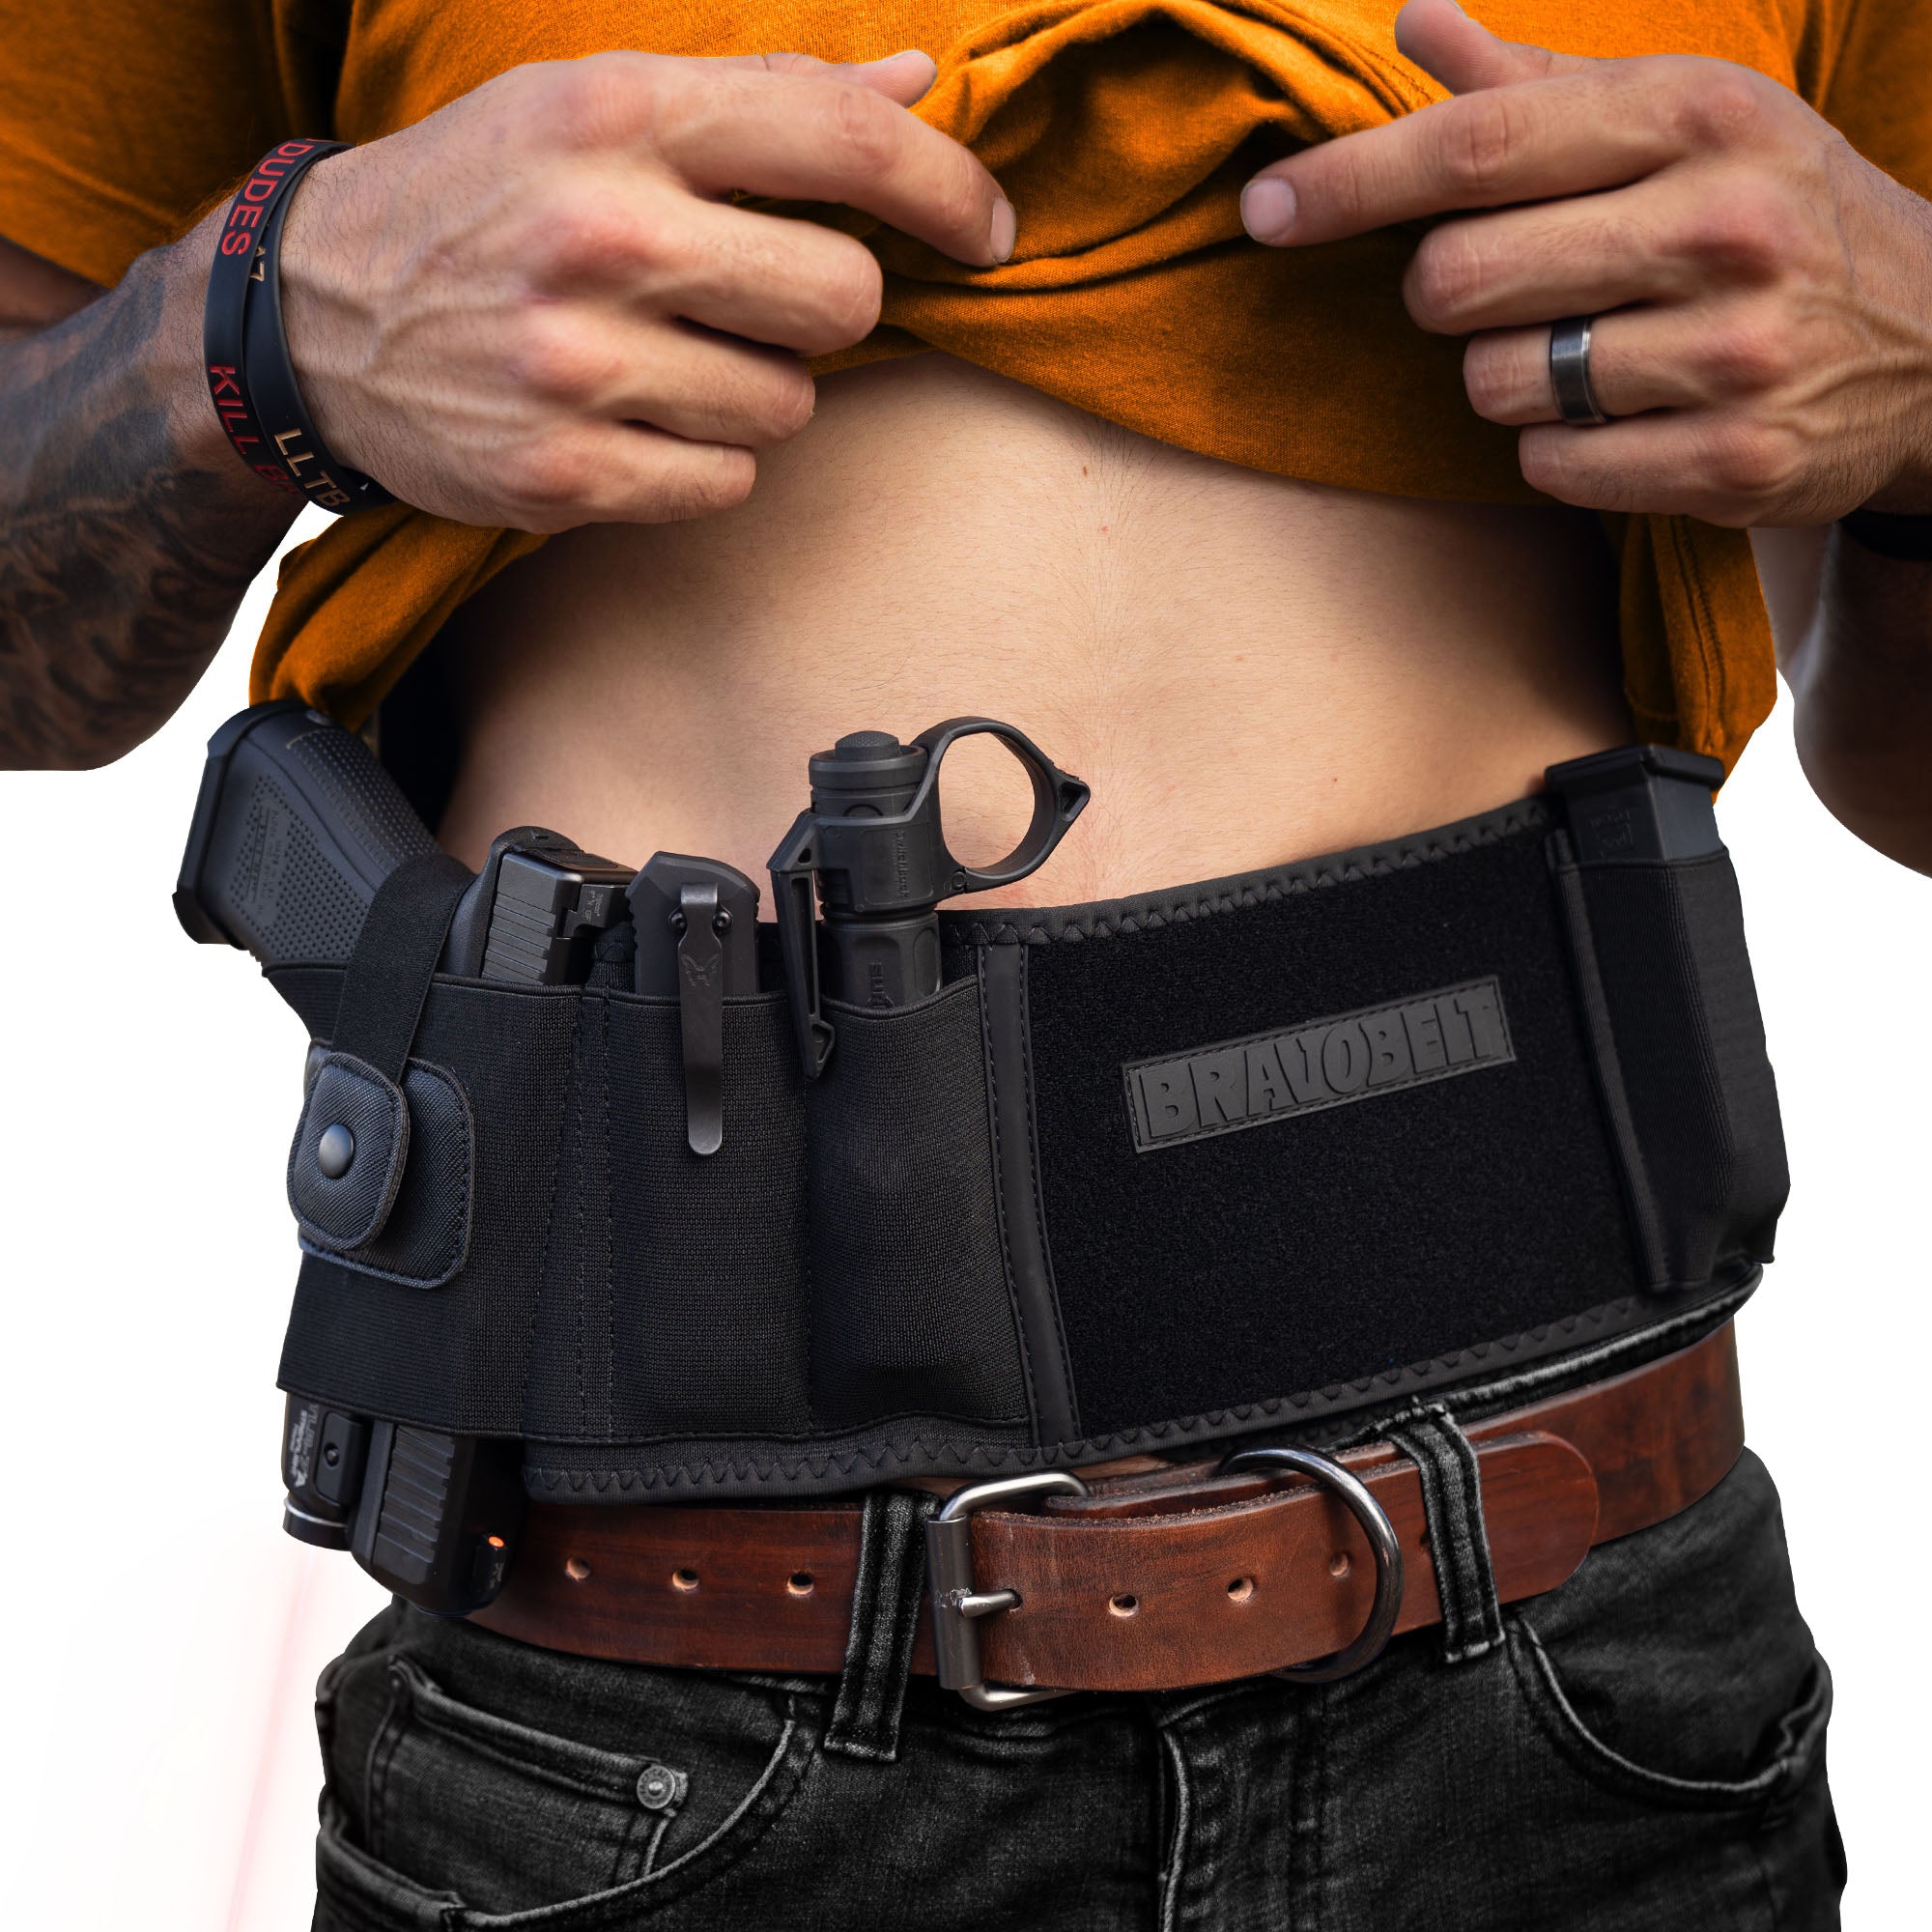 Ultimate Belly Band Holster for Concealed Carry, Black, Fits Gun